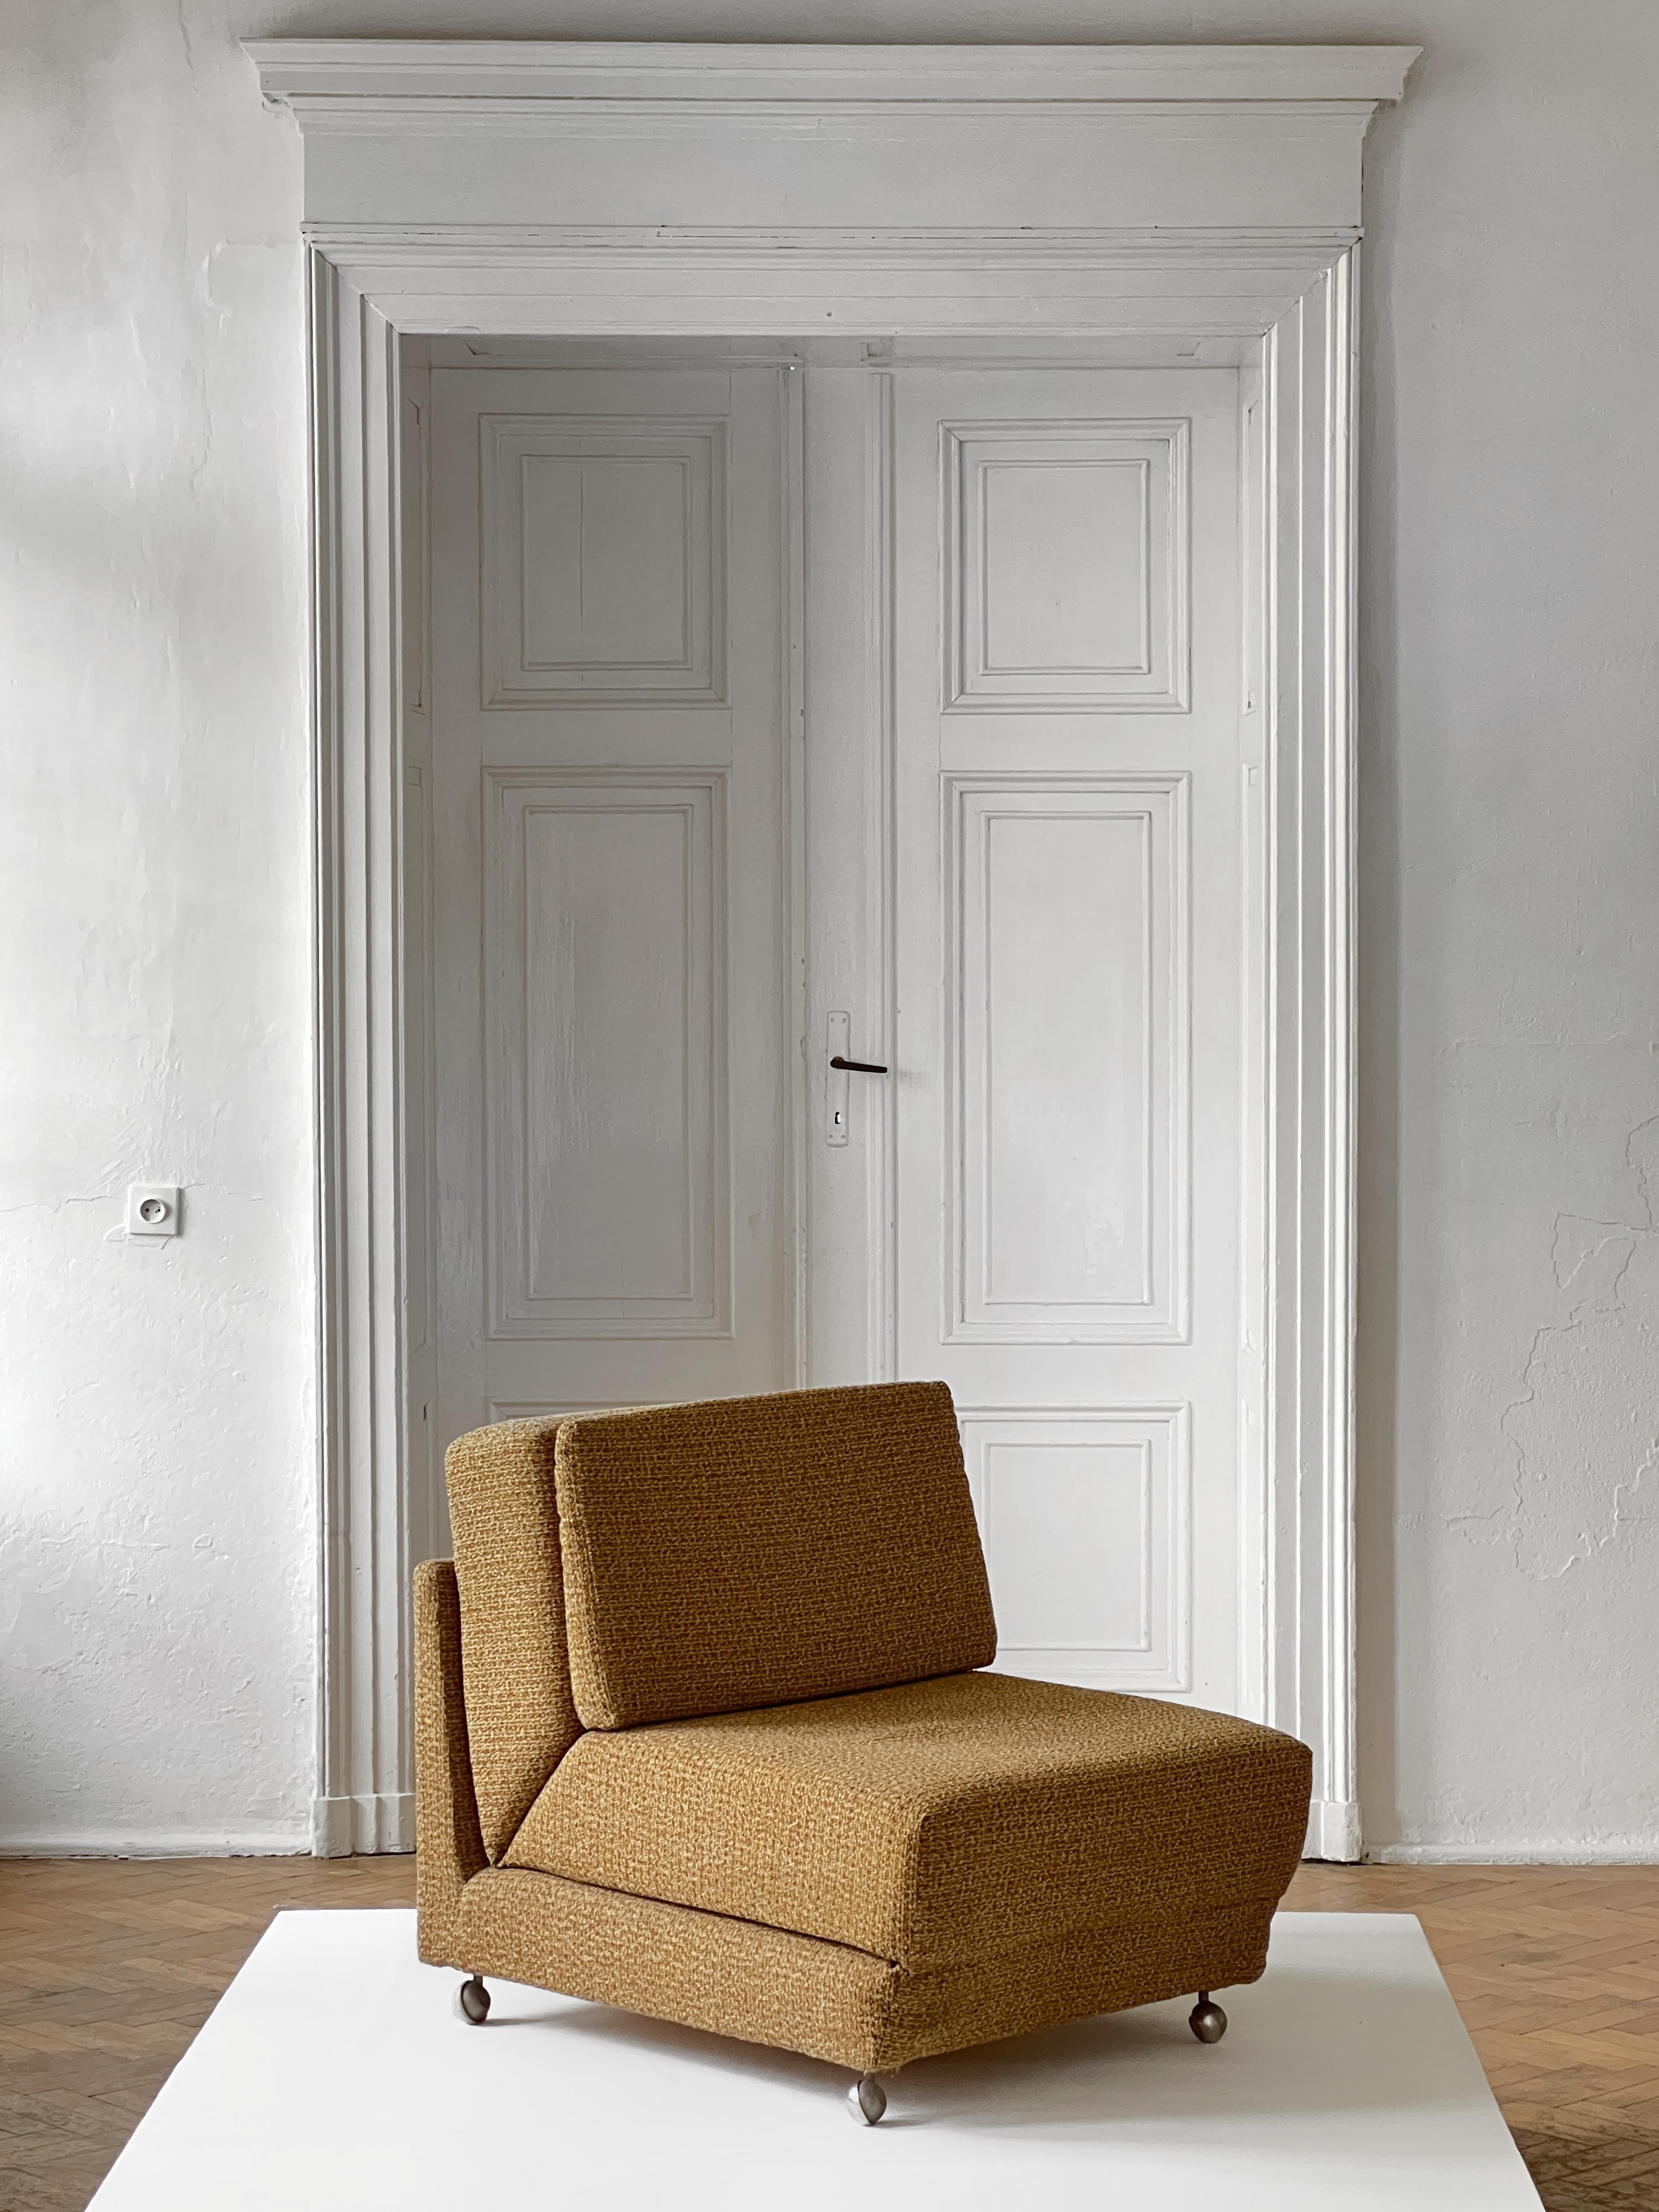 We are pleased to present these extremely unique reclining armchairs called 'Jarka'.
Produced by former Czechoslovakian company Drevounia, they were imported by Polish CHZ 'Paged' Warszawa and distributed between circa 1960 - 1980 (estimation based